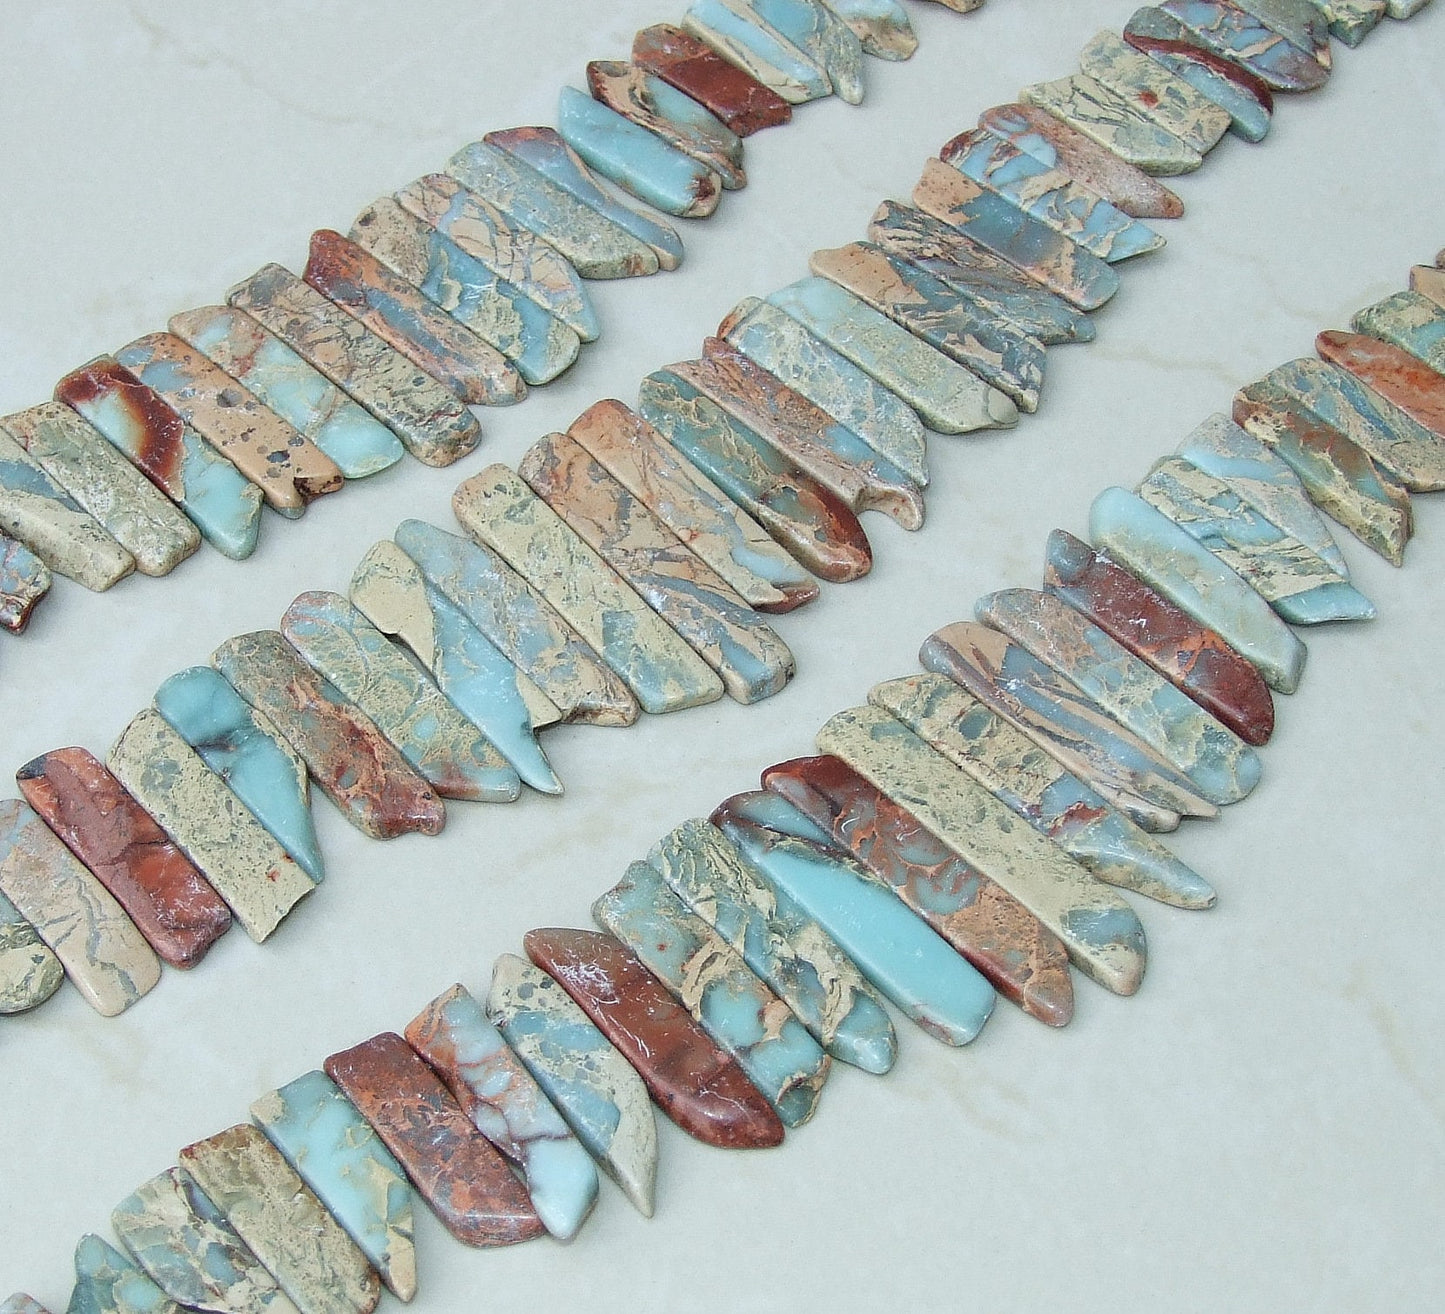 African Opal Beads for Jewelry Making, Aqua Terra Jasper Slice Beads for Necklace Making, Imperial Jasper Slab Bead Strand, Loose Beads 45mm